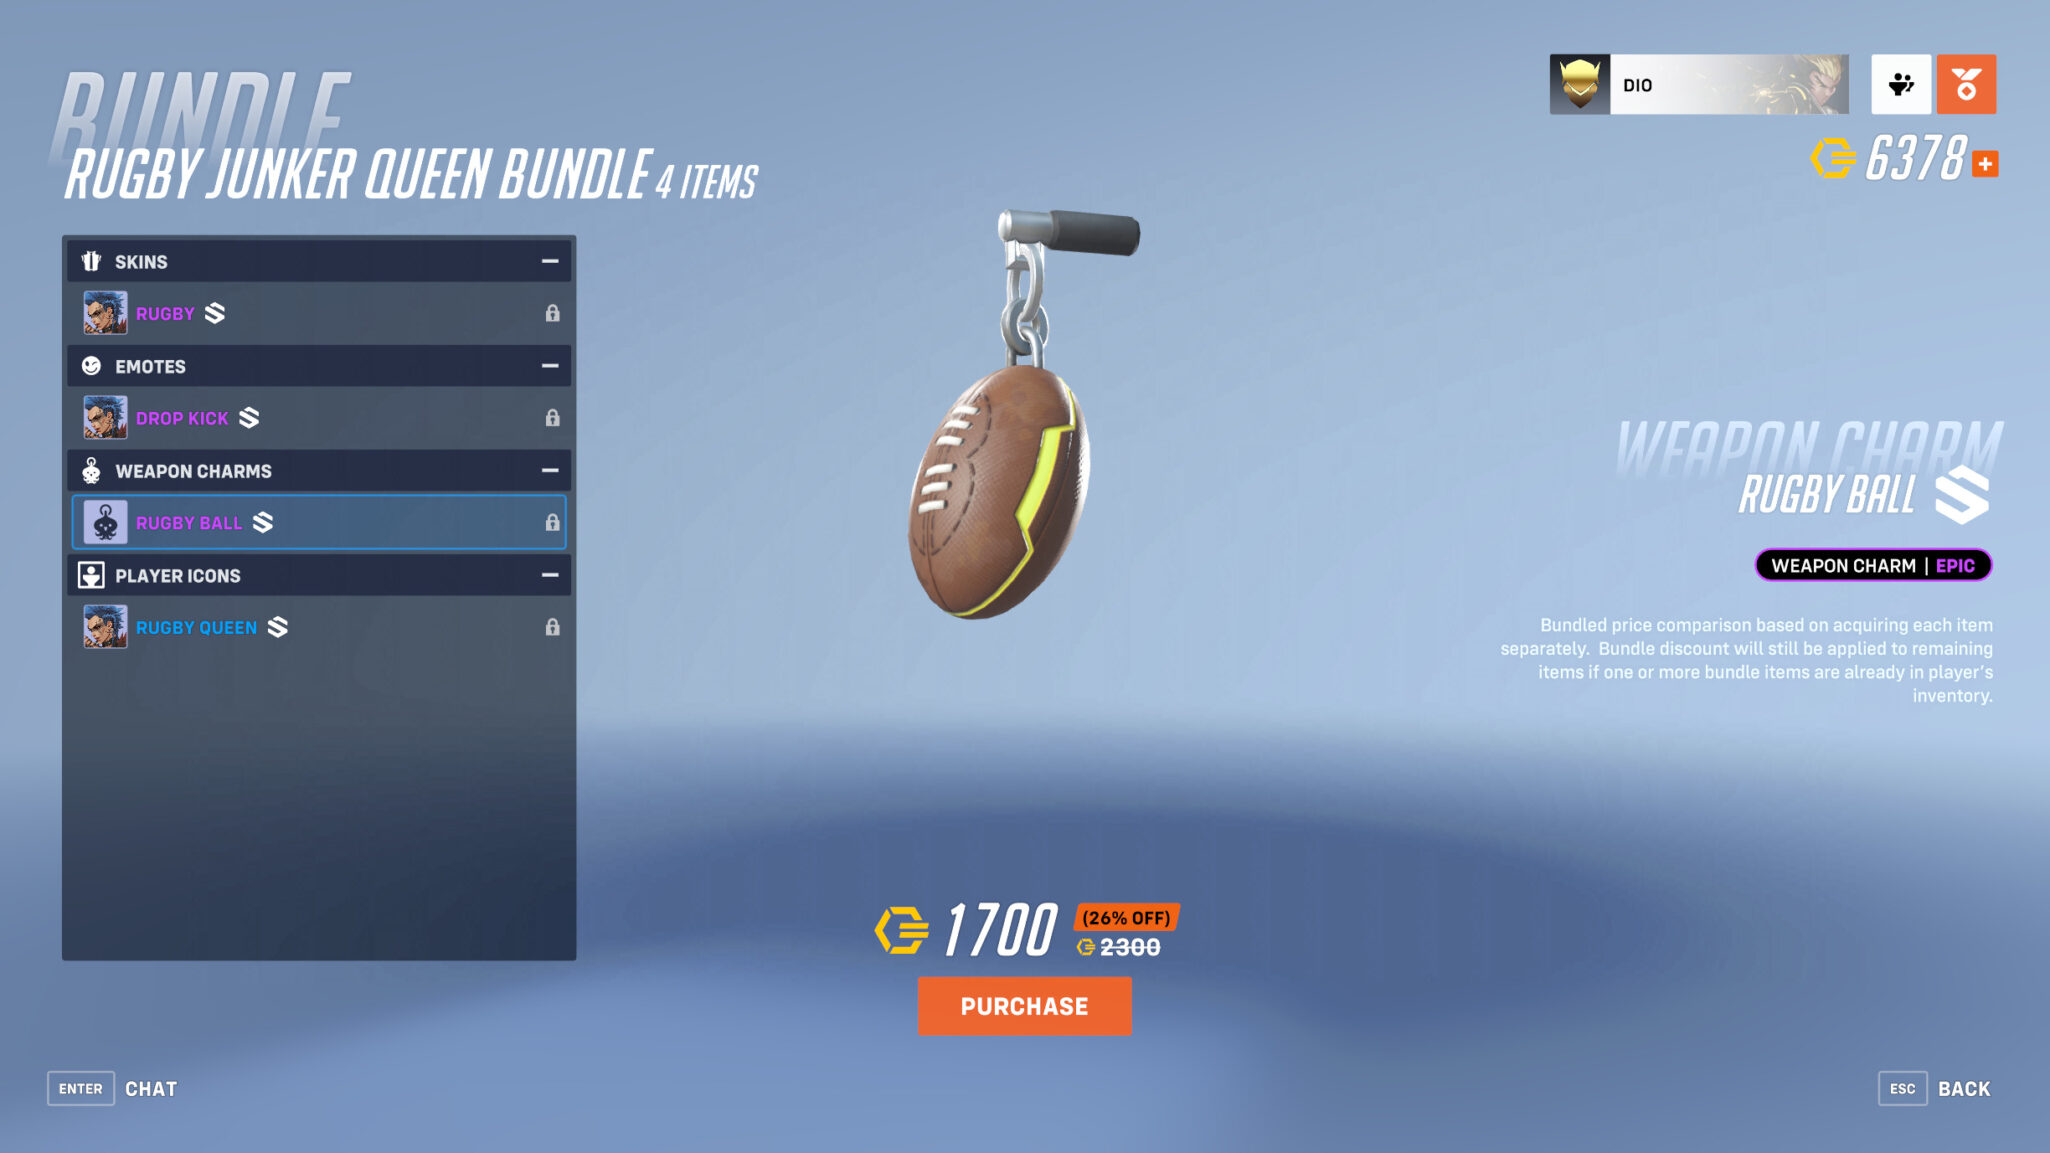 Rugby Ball weapon charm (Image via Blizzard Entertainment)